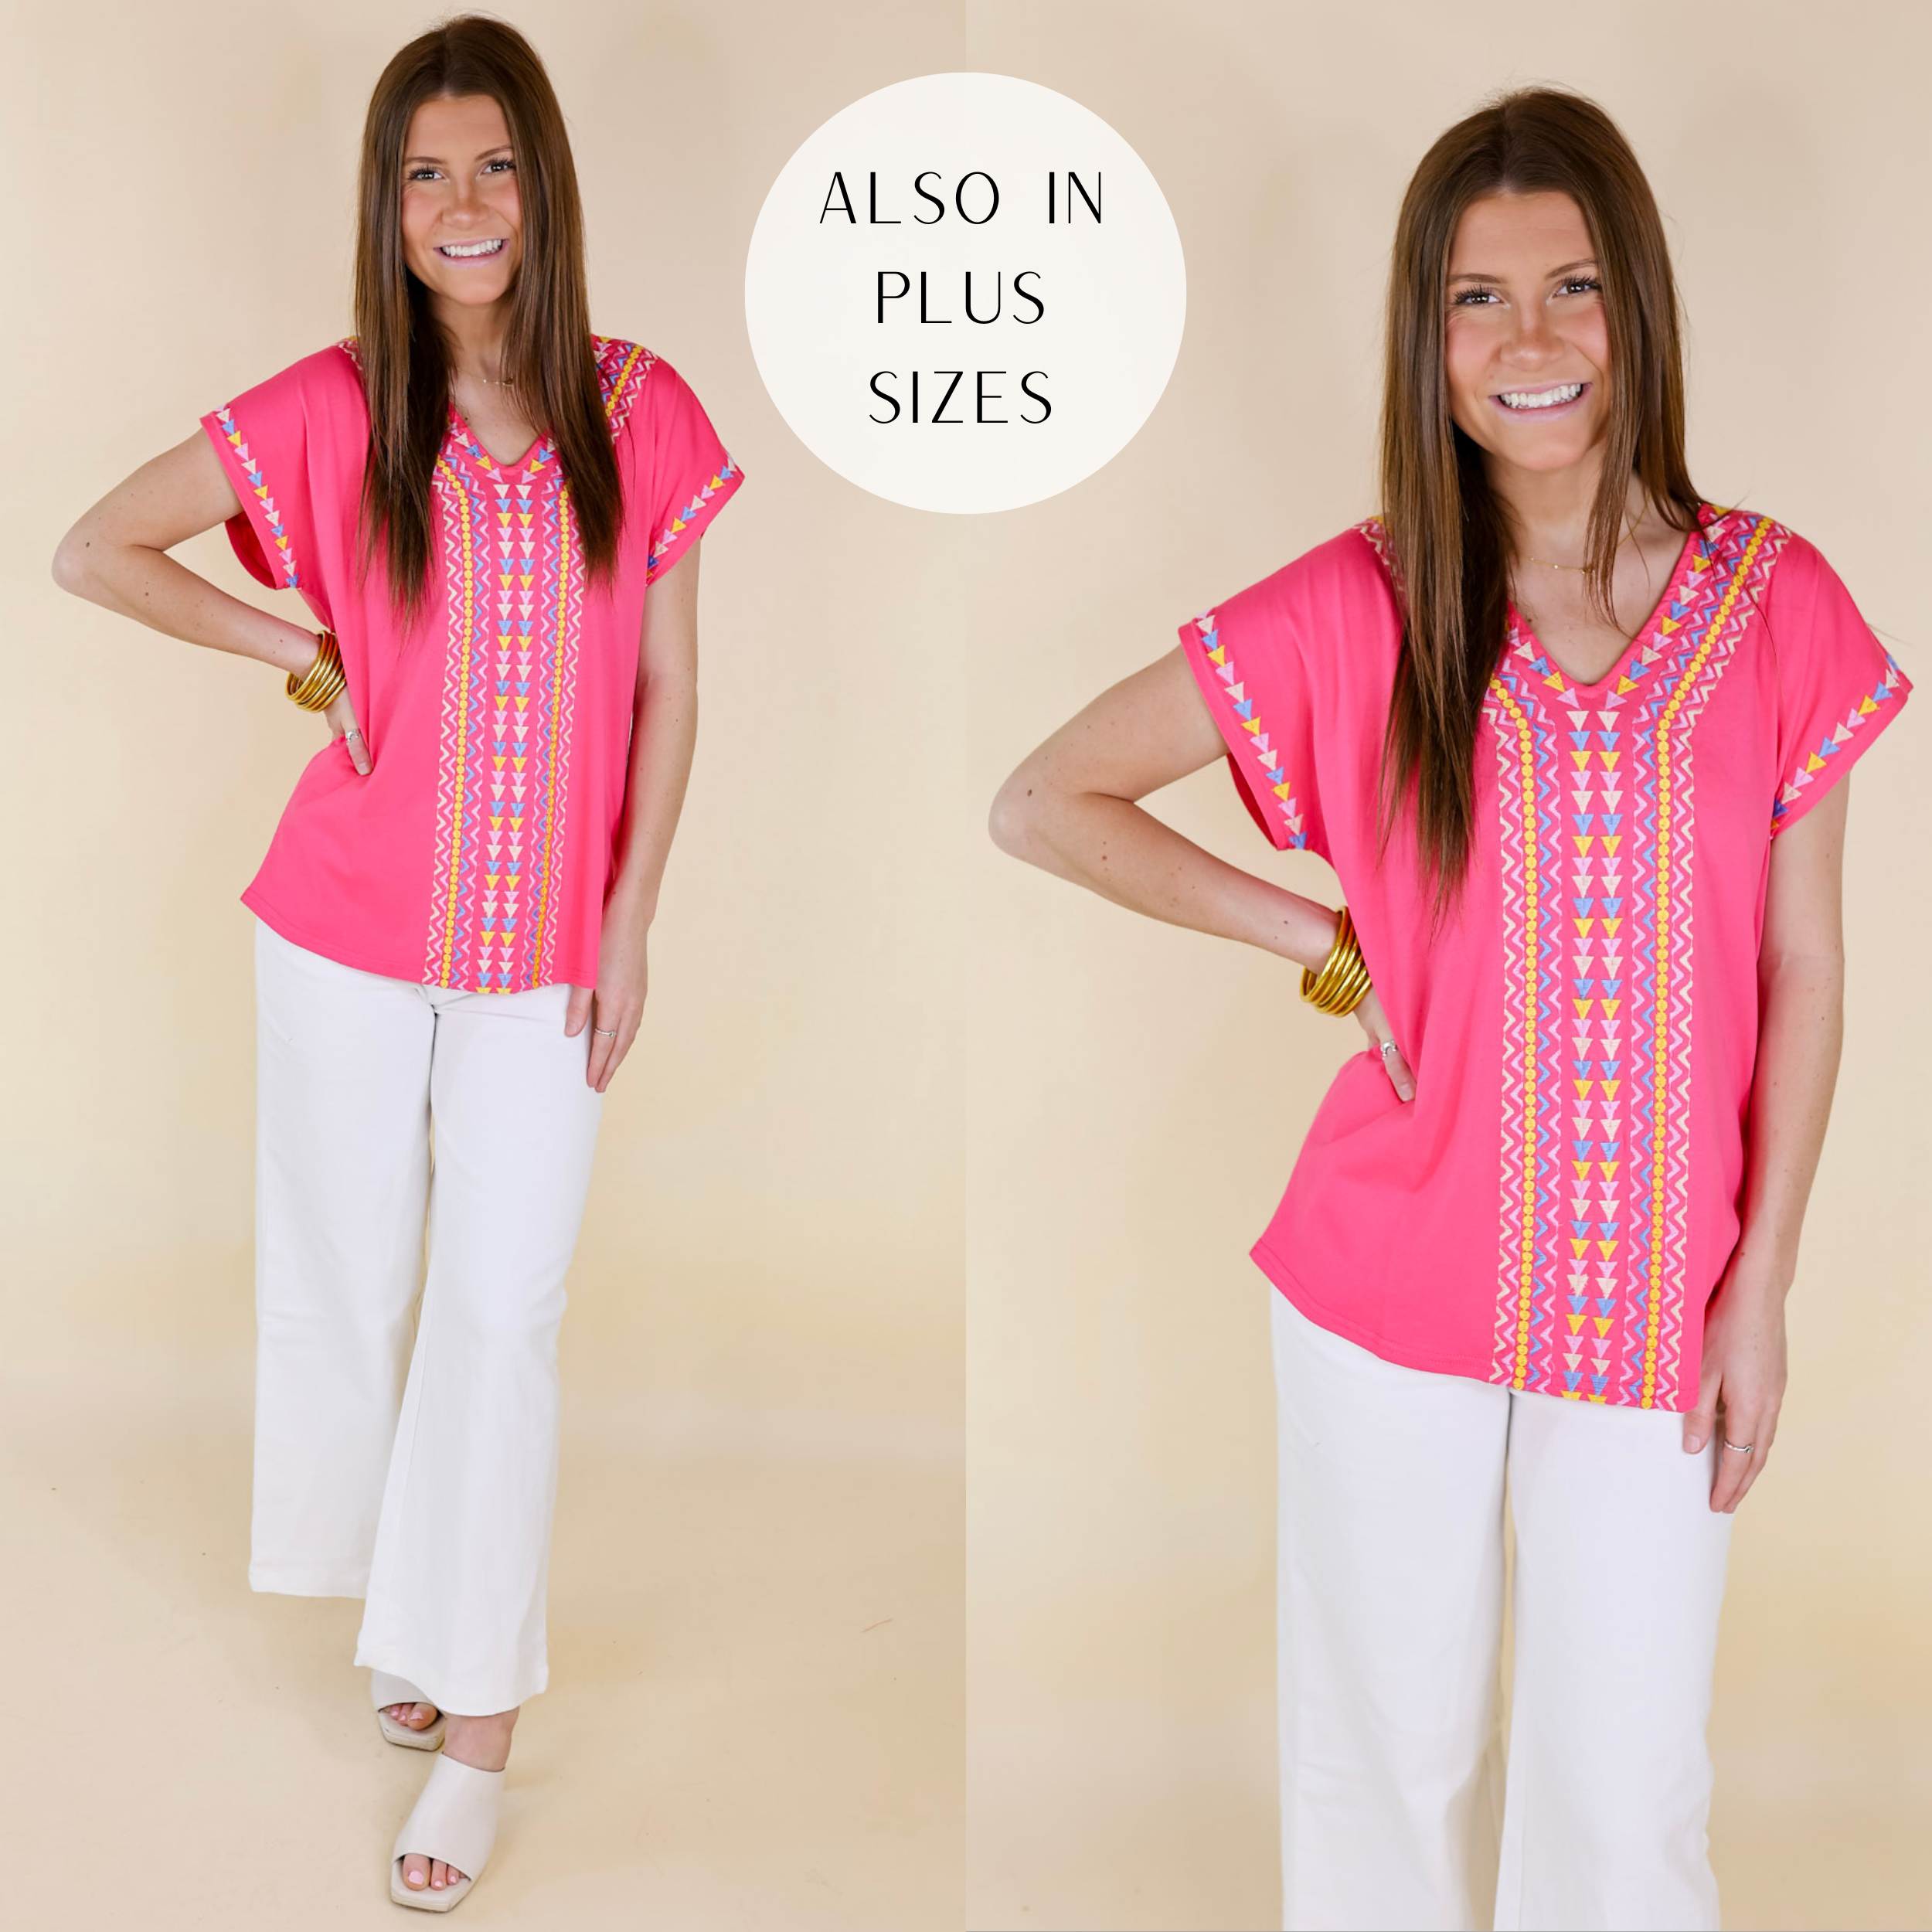 Model is wearing a hot pink short sleeve top with embroidery down the front. Model has it paired with white jeans, white heels, and gold jewelry.